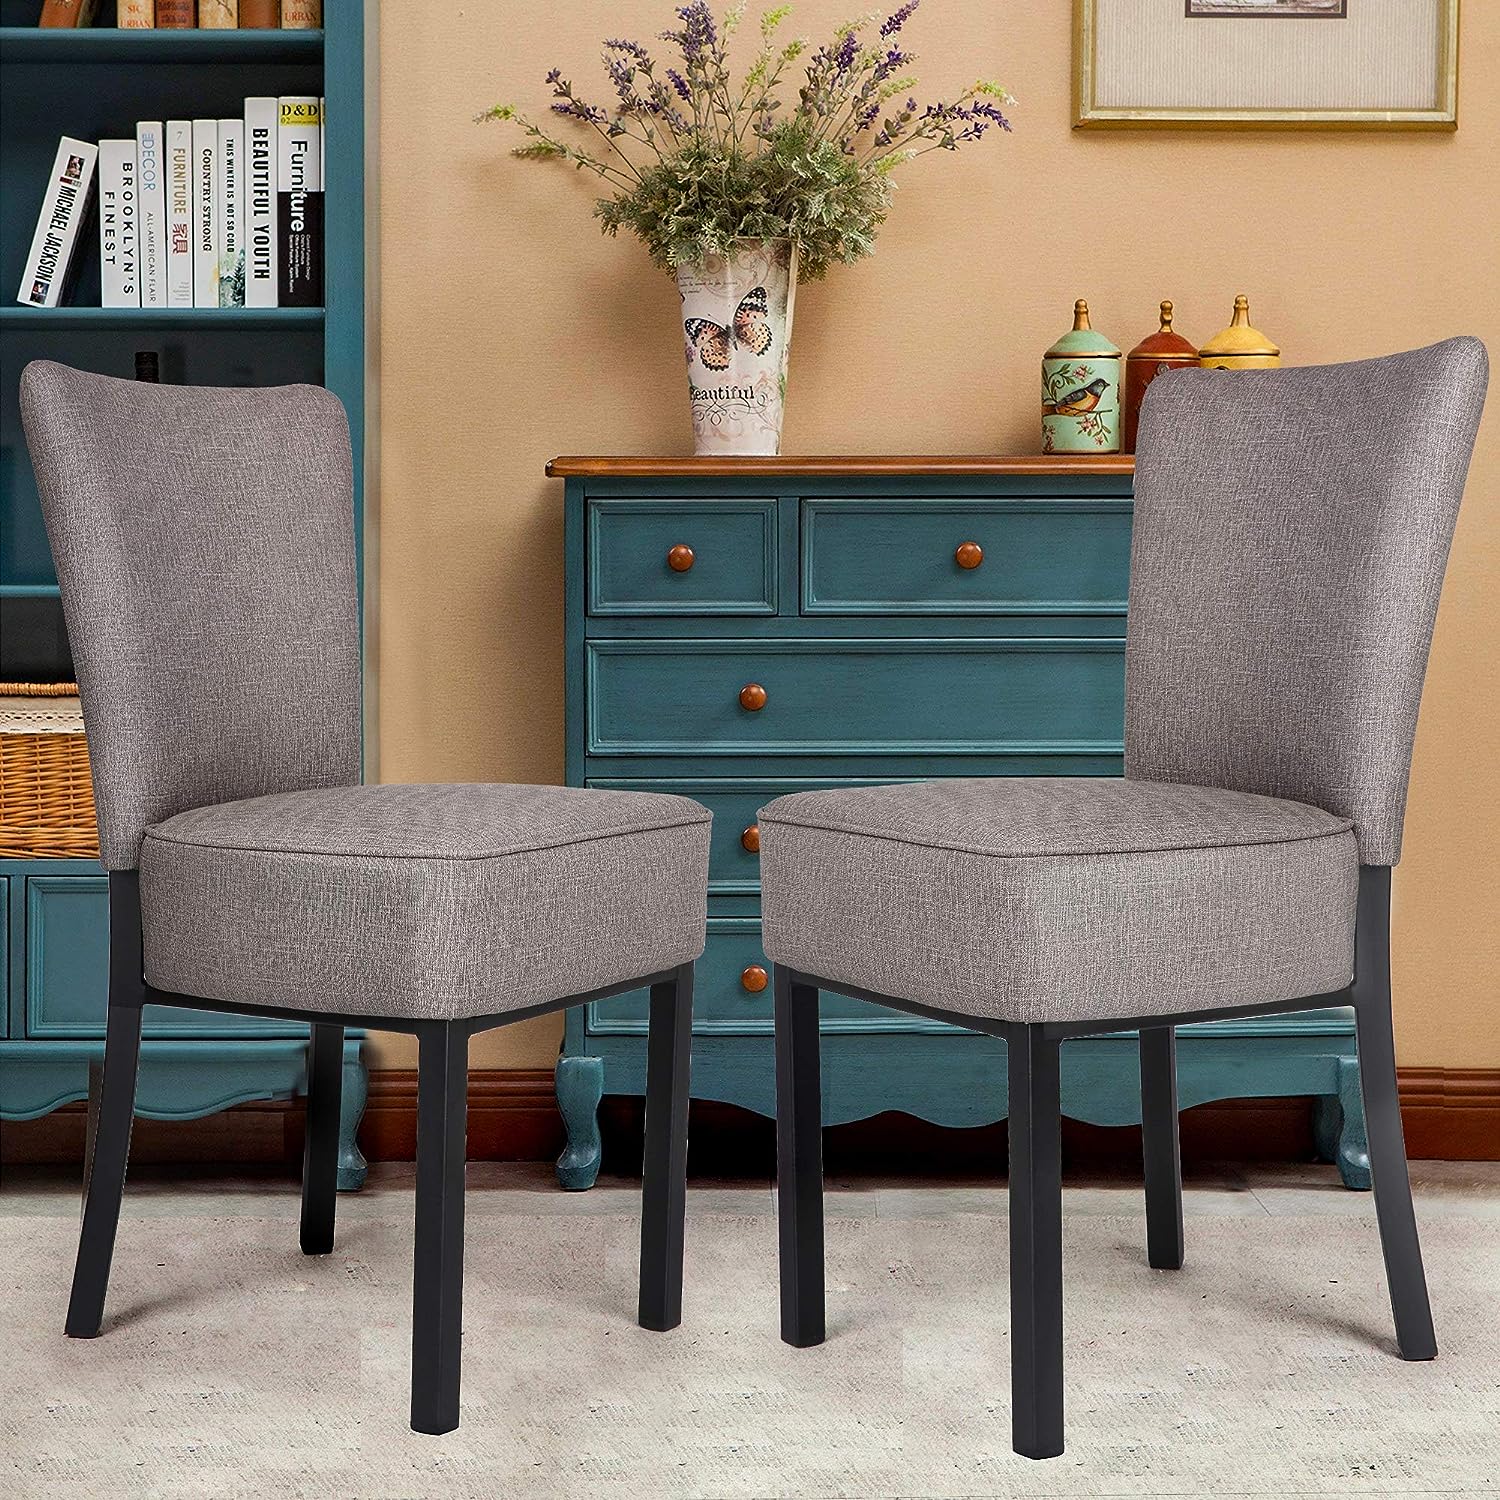 LUCKYERMORE Set of 2 Modern Dining Chairs PU Leather Side Chairs with Soft Cushion, Gray